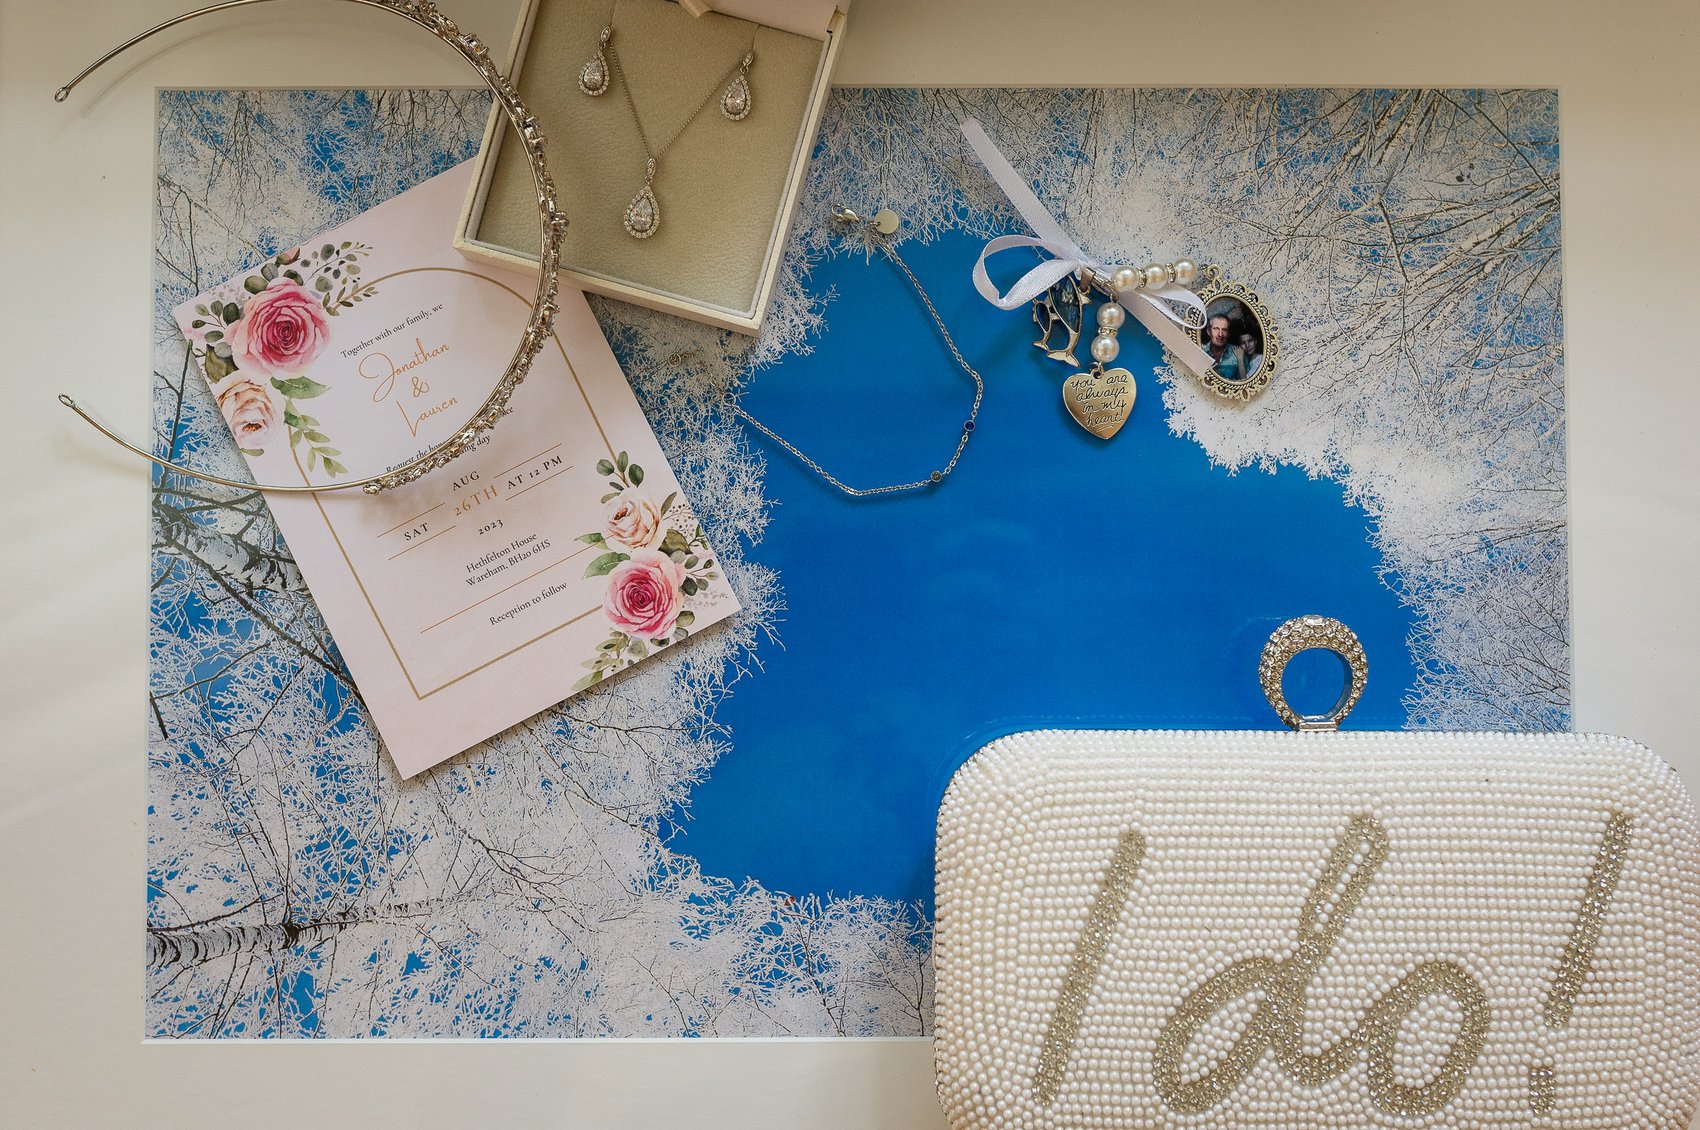 Bridal details containing jewlery, invite and purse saying I do